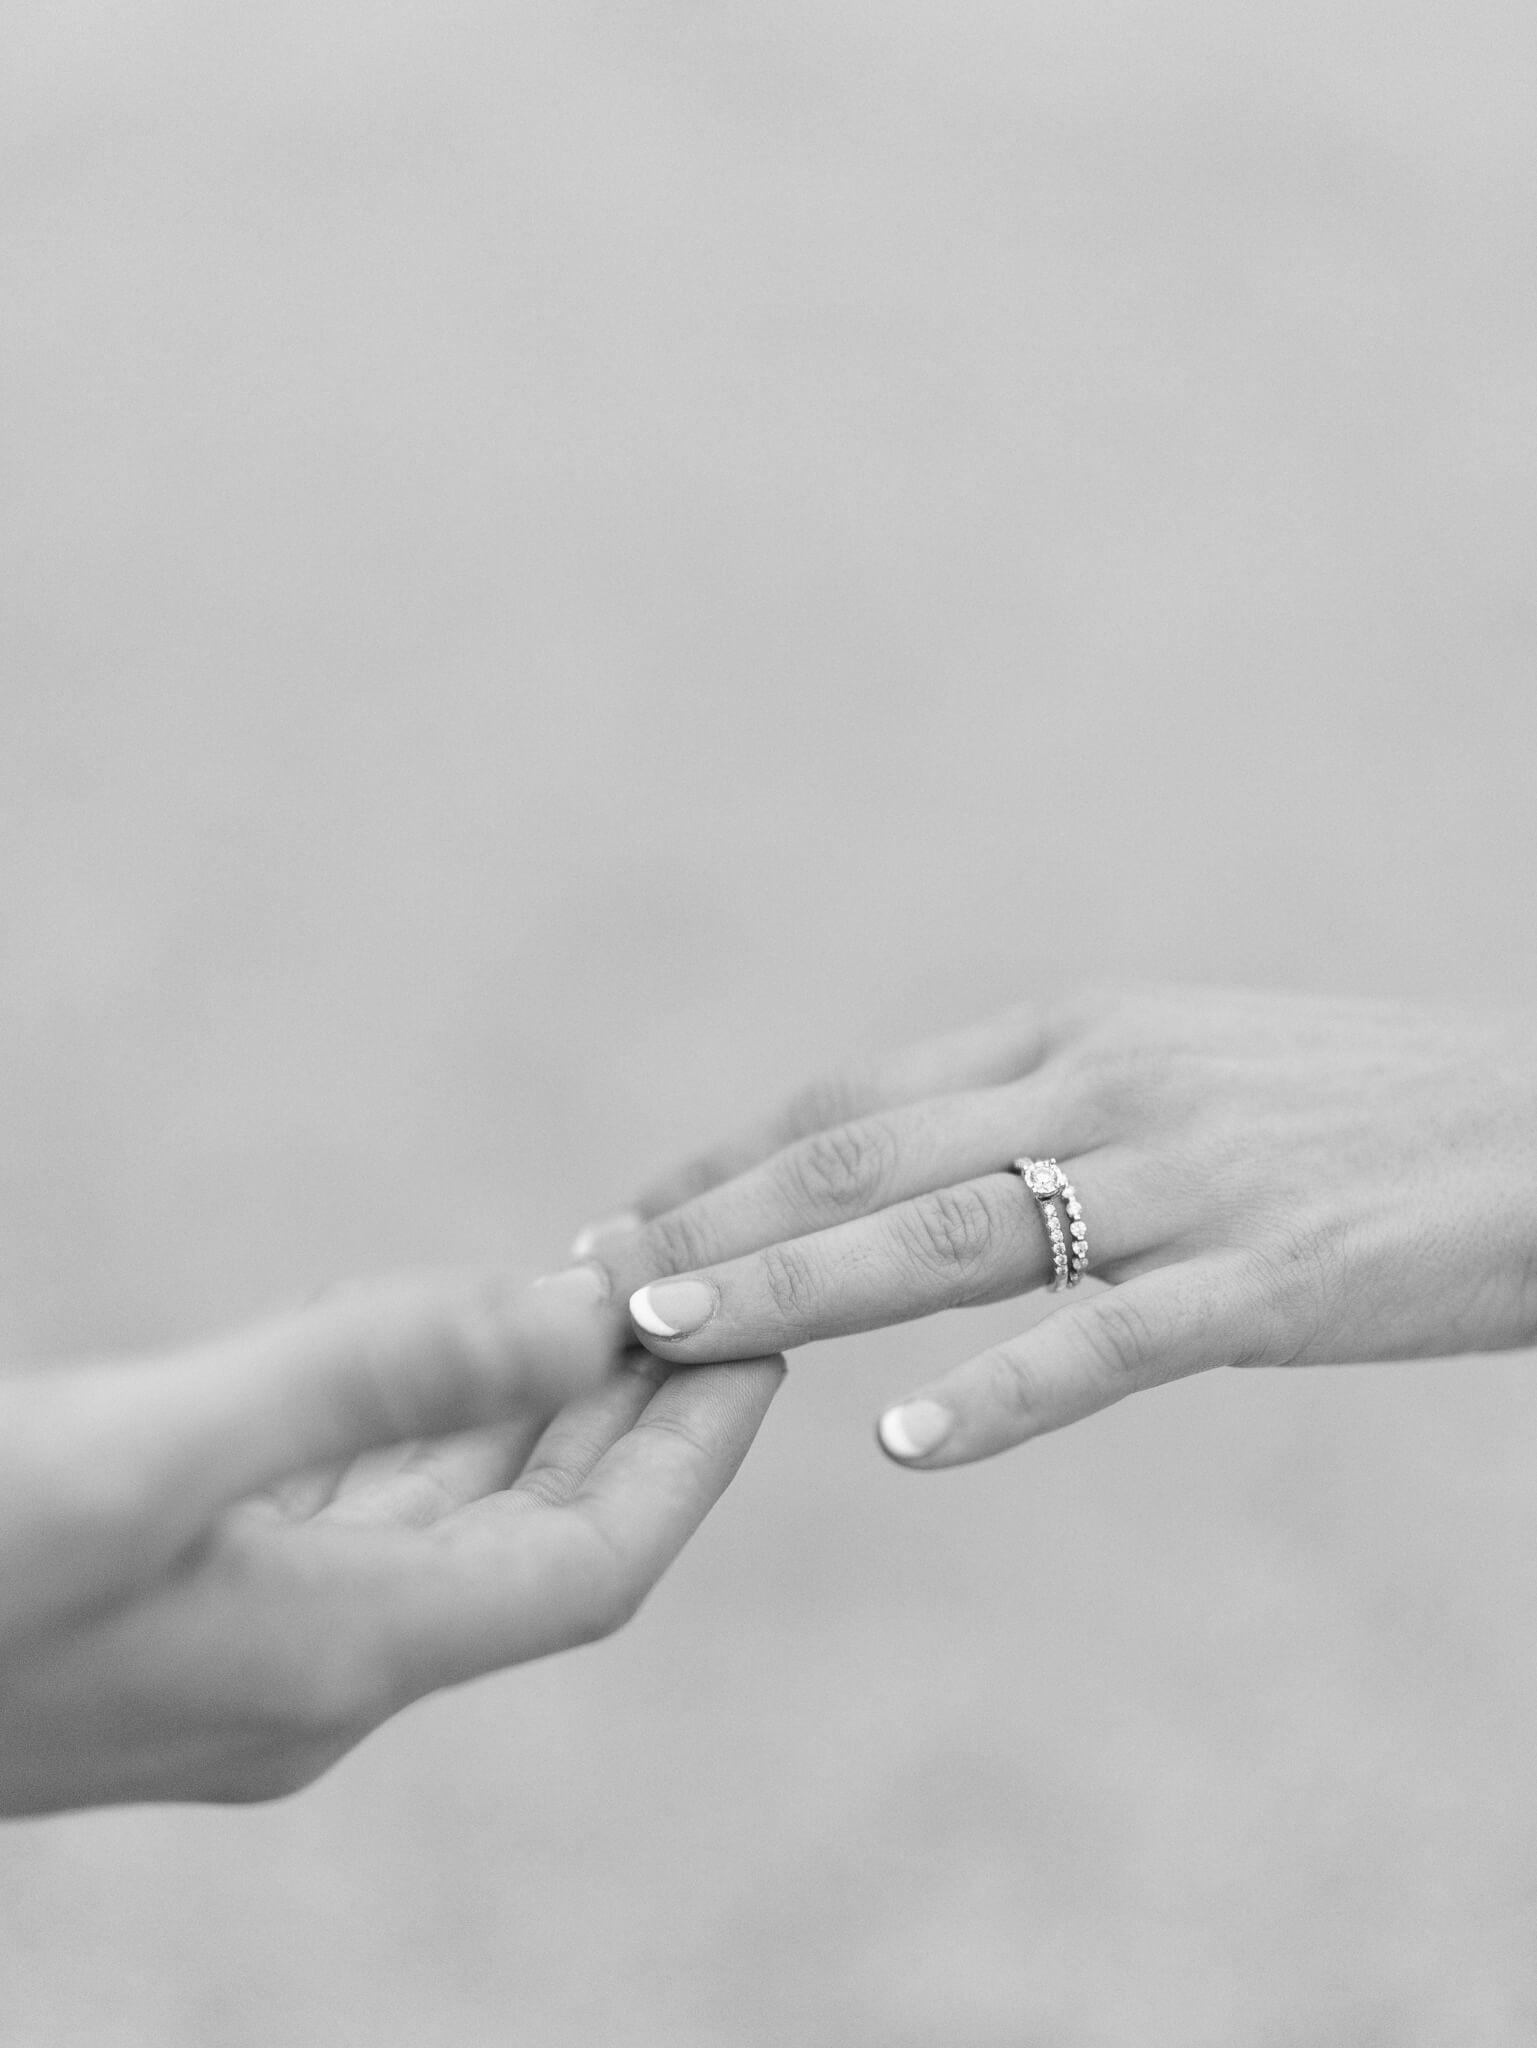 A close-up black and white image of the bride and groom's hands.